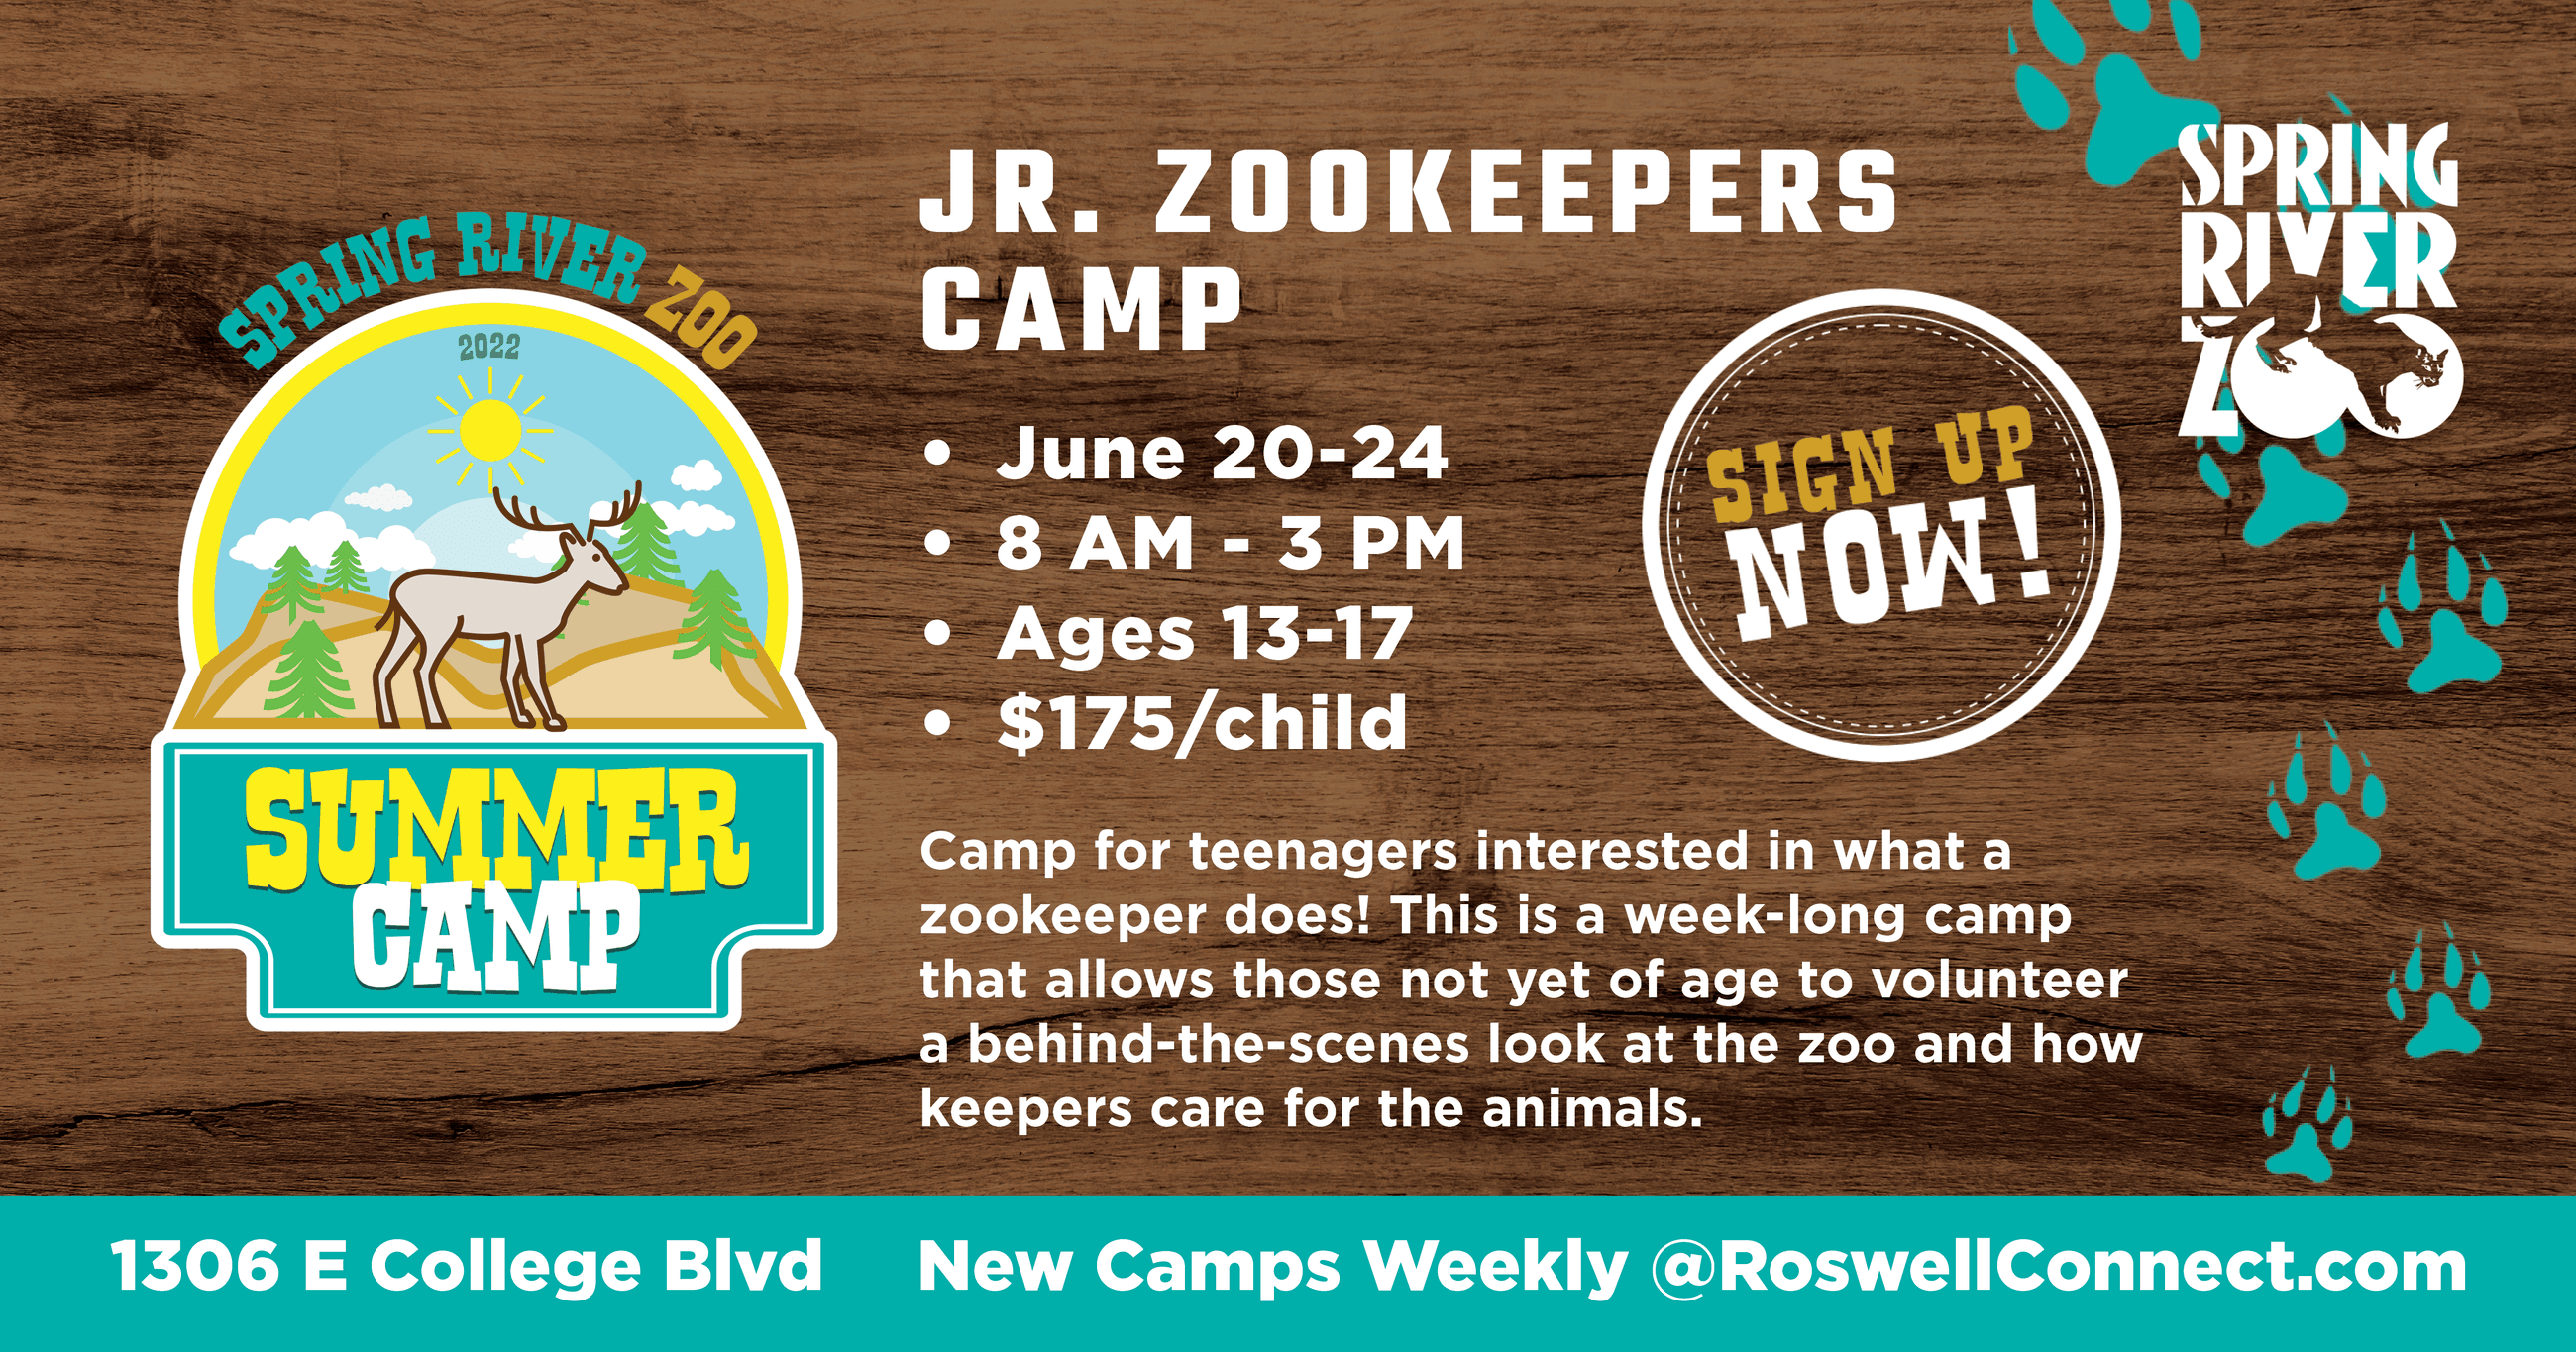 jr. zookeeper camp